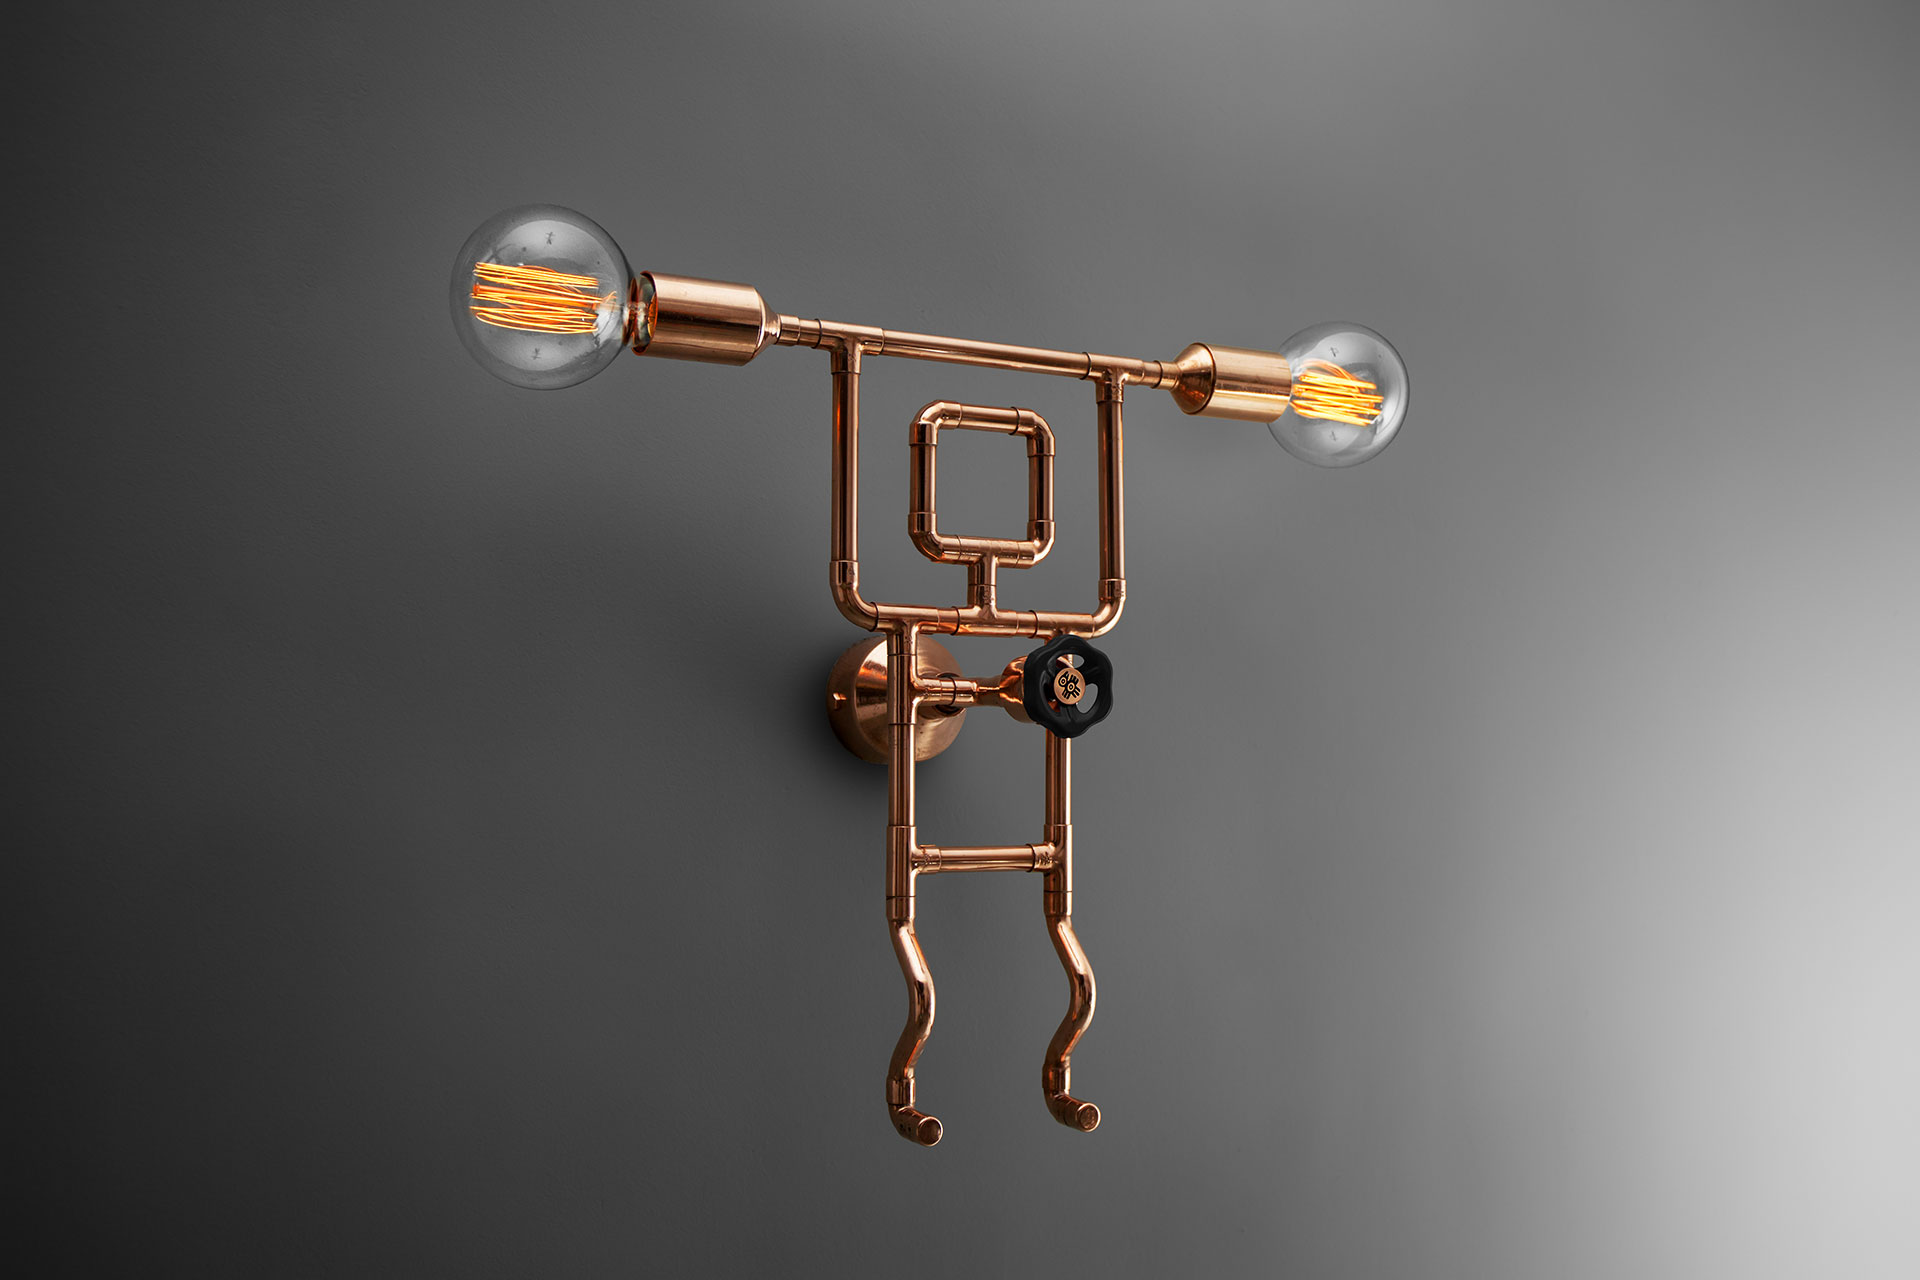 Cool dimmable sconce in copper or brass inspired by industrial design